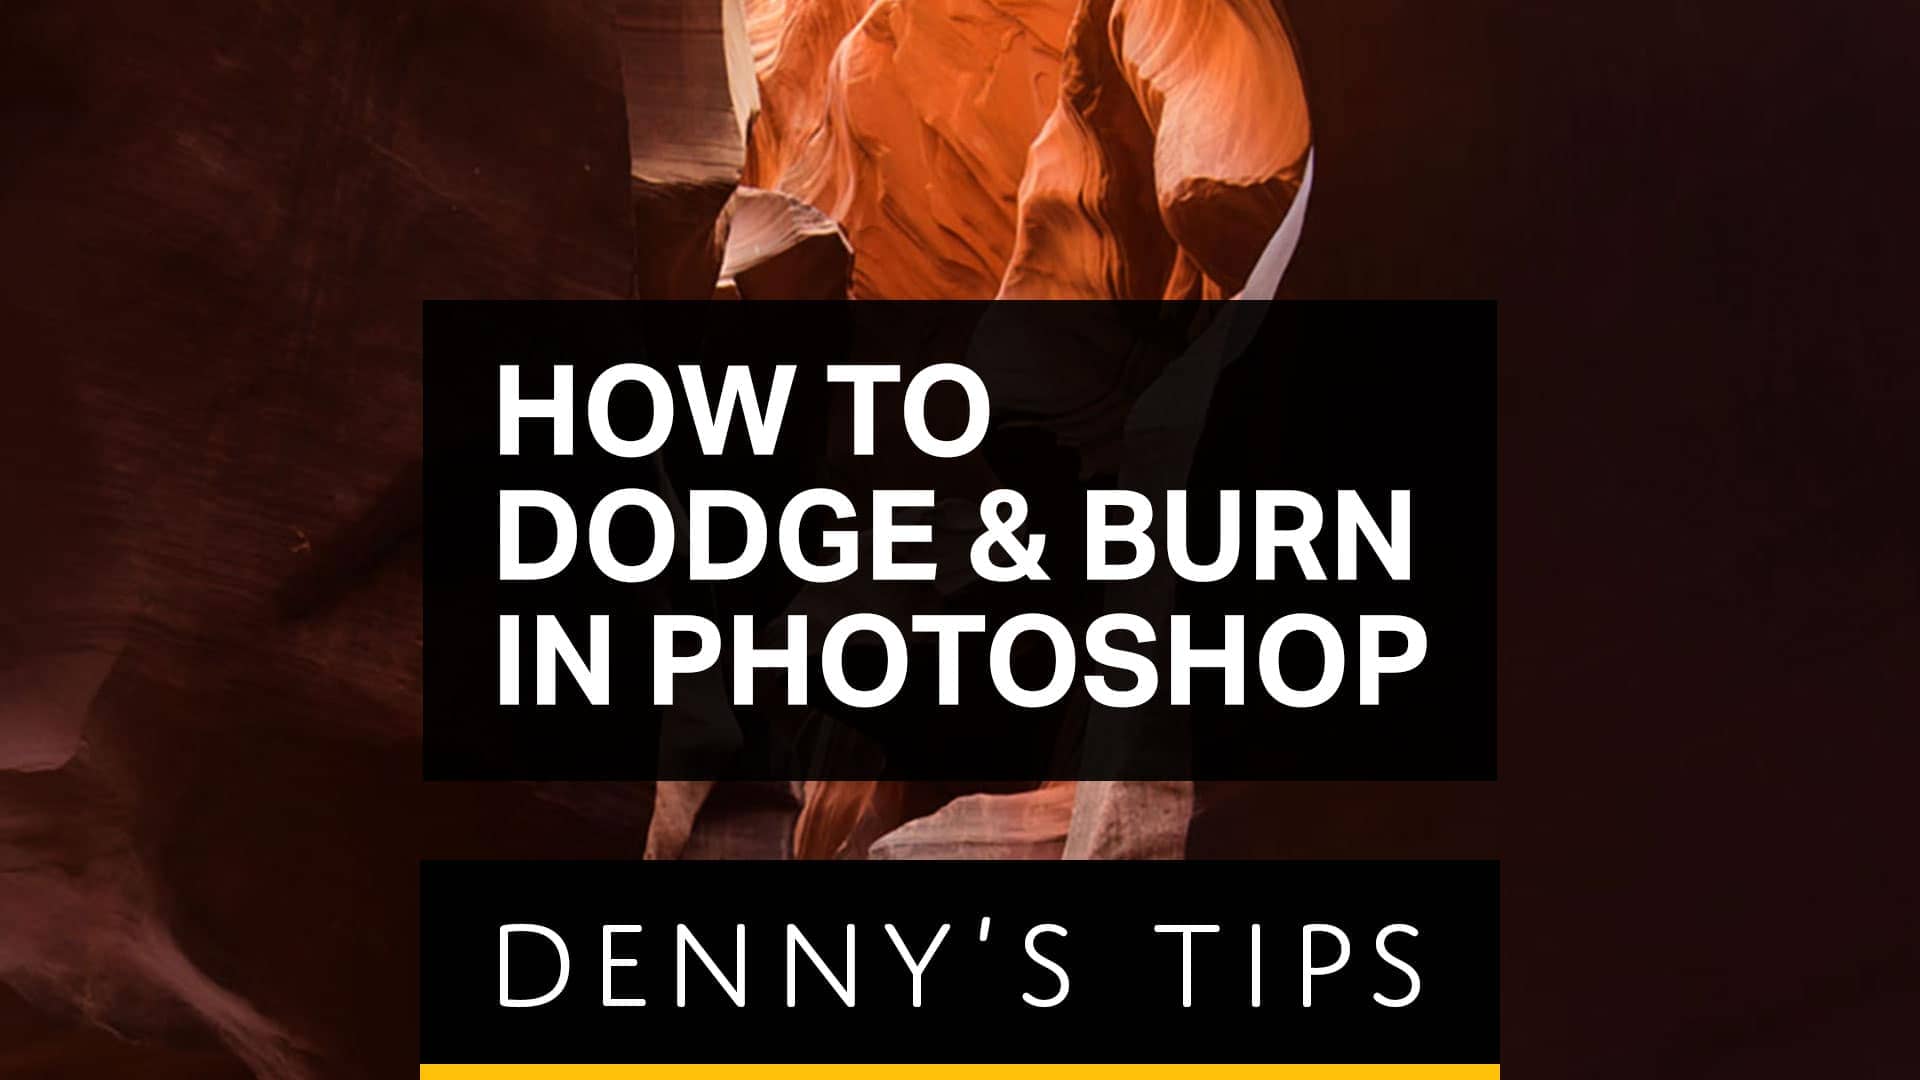 Guide to Dodging and Burning Nondestructively in Photoshop